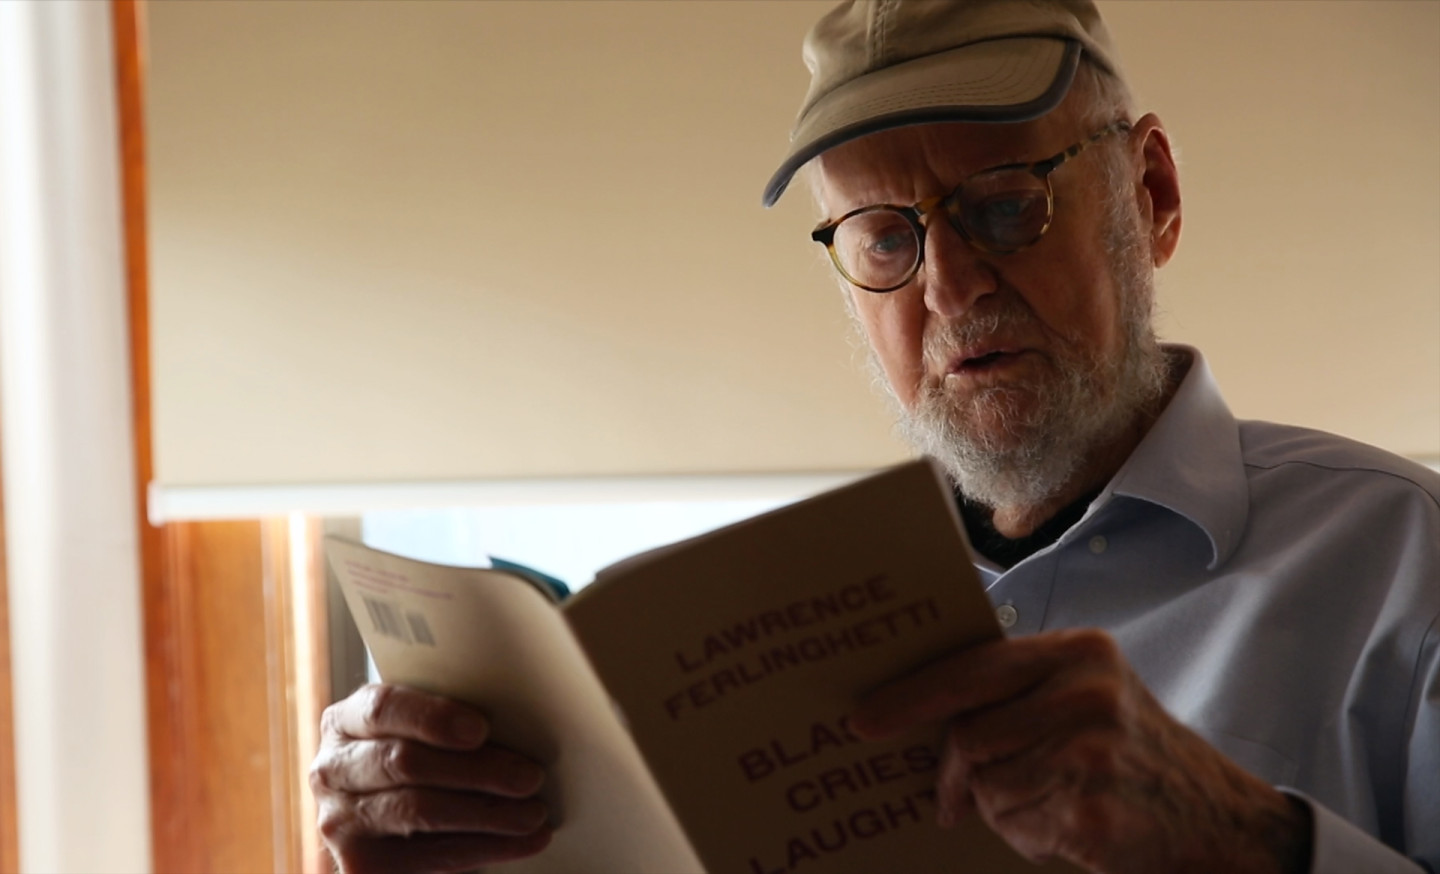 Beat poet and painter Lawrence Ferlinghetti will turn 96 in March. (Adam Grossberg/KQED)